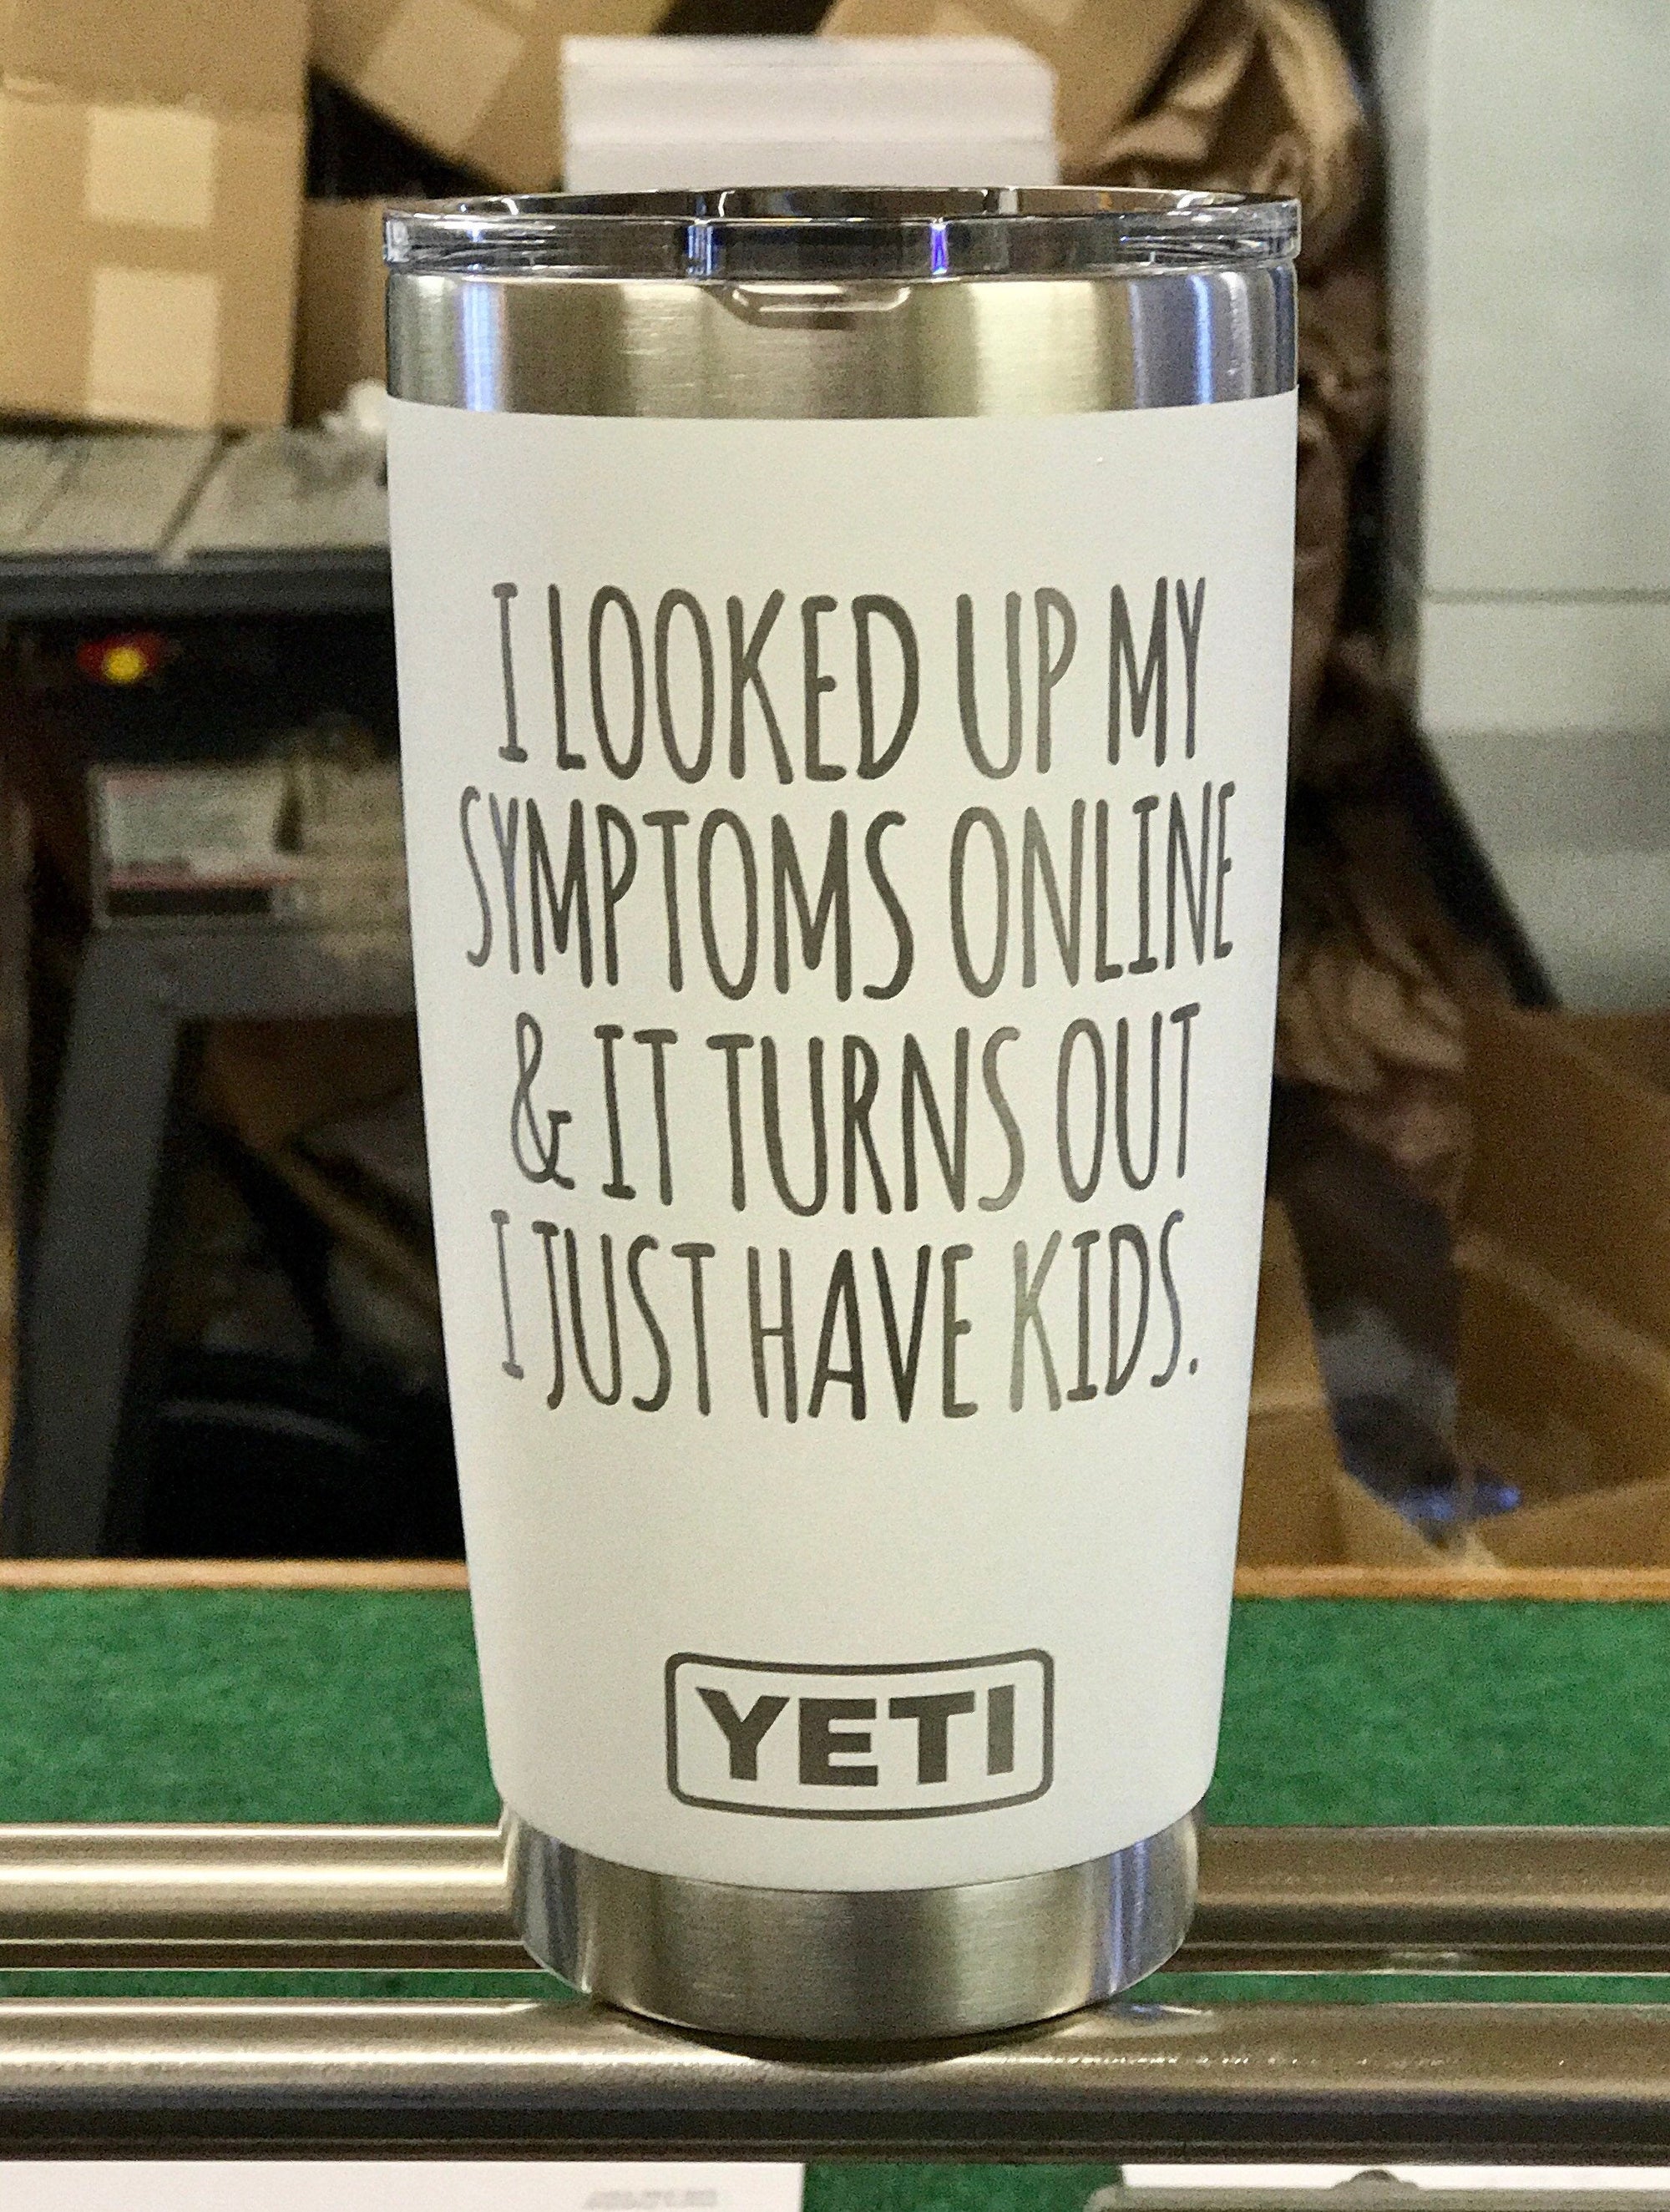 Yeti tumblers count as EDC. Change my mind. Copper colour of